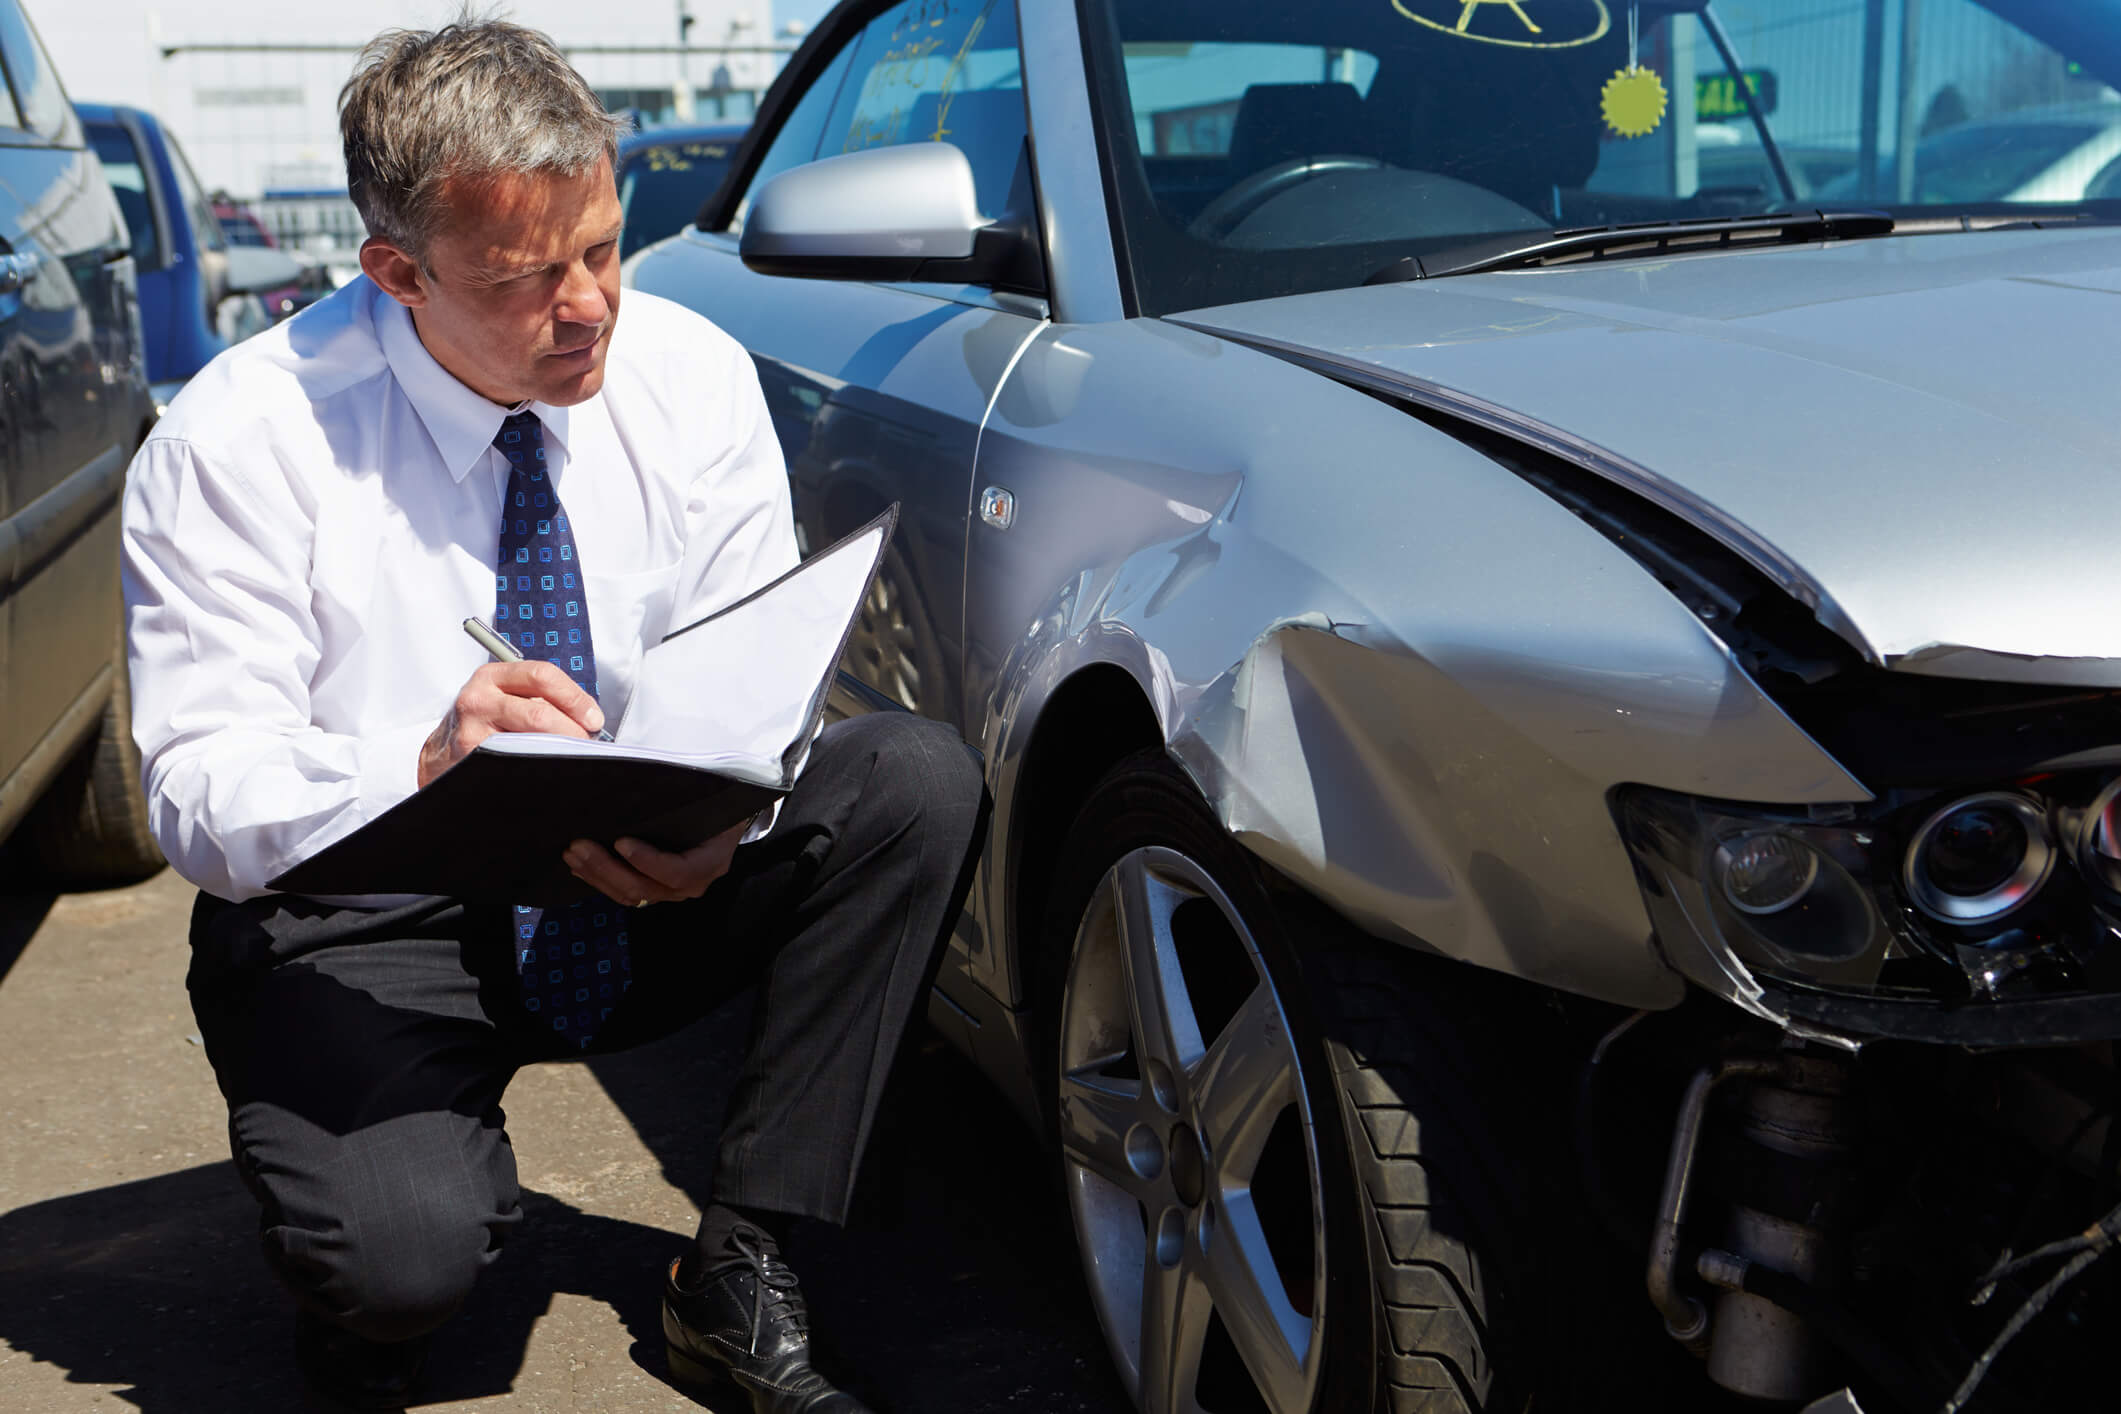 Types of Vehicle Insurance - Complete Controller